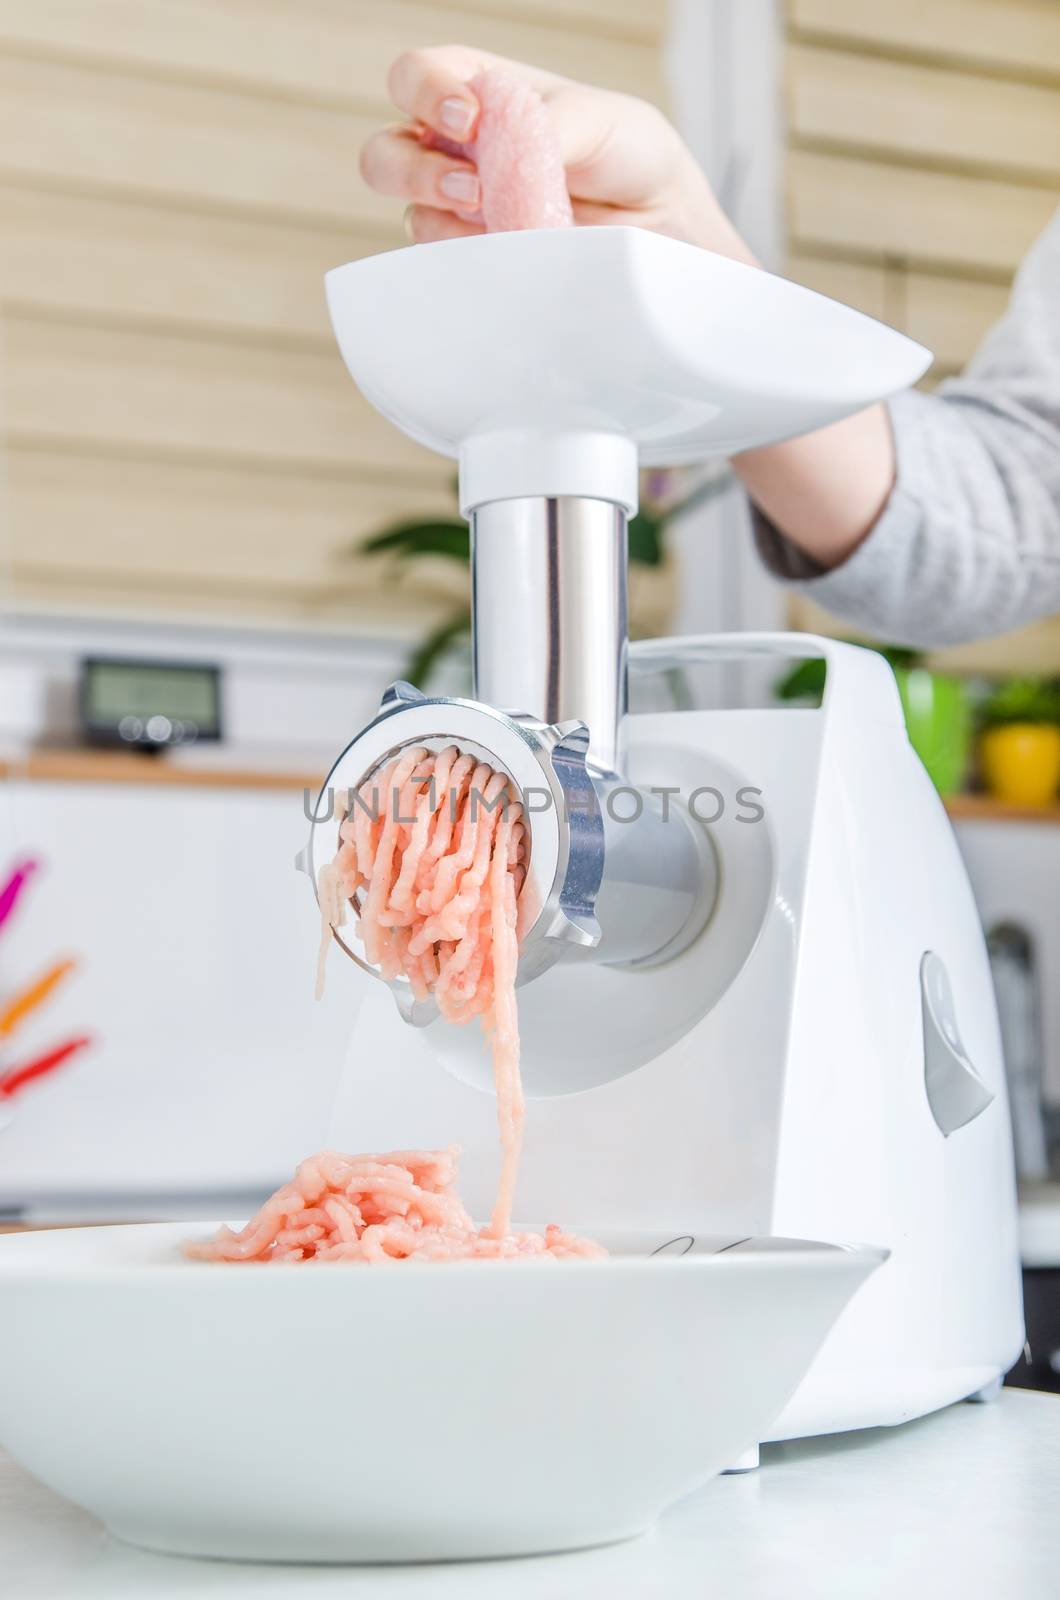 Grinder with minced meat in modern kitchen